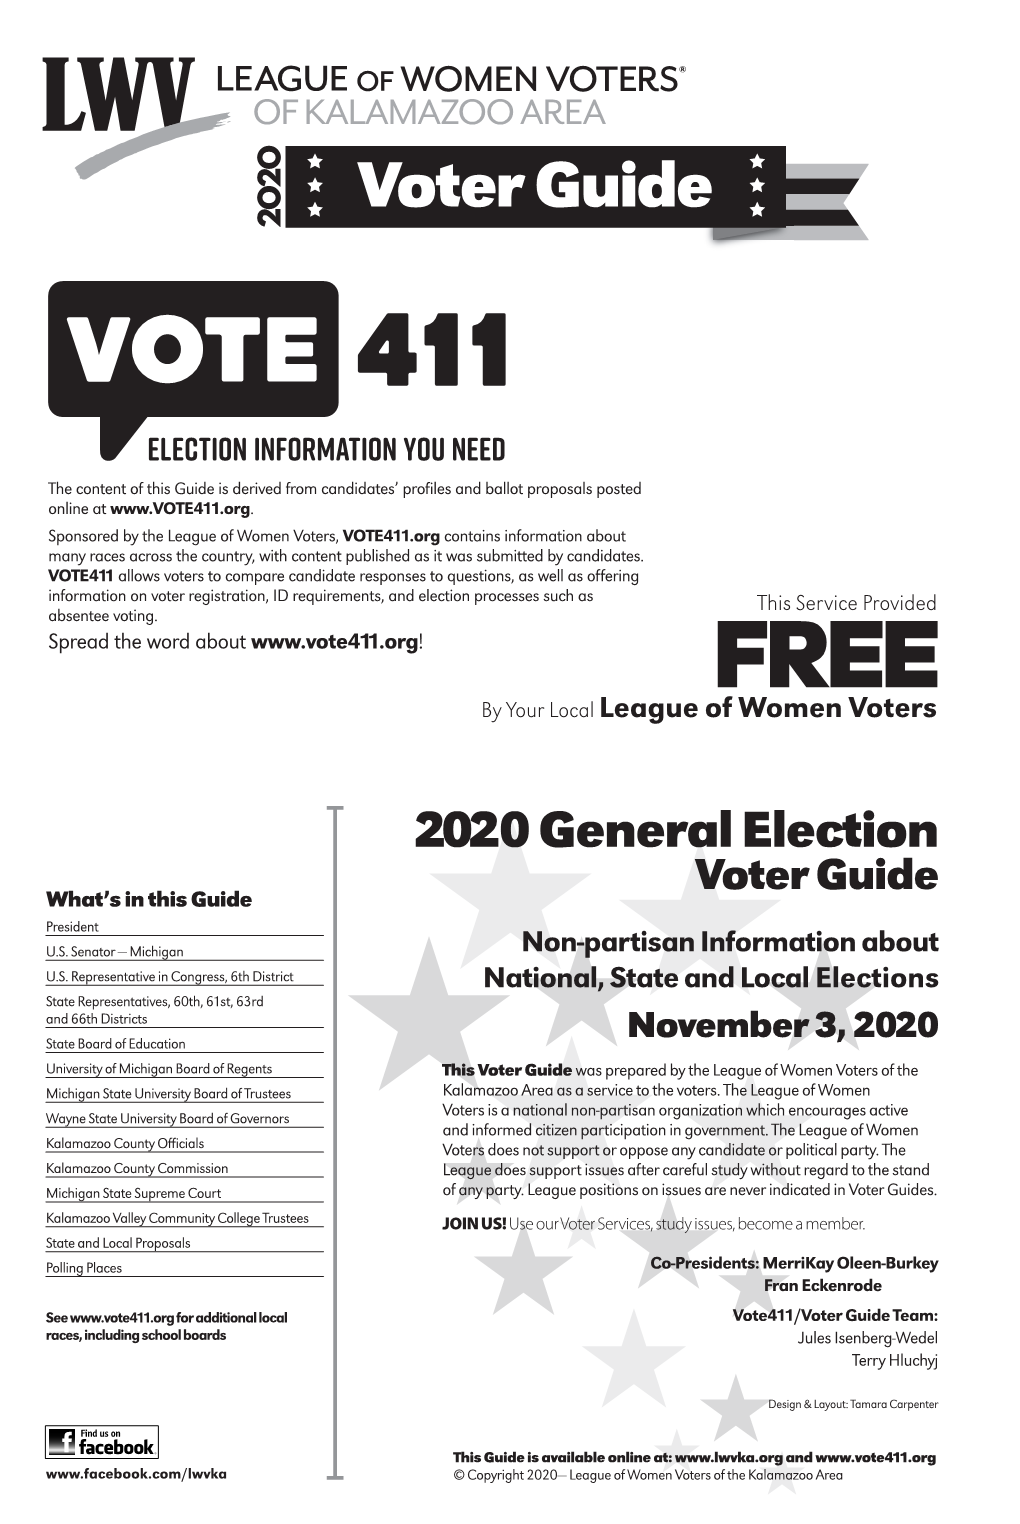 Voter Guide 2020